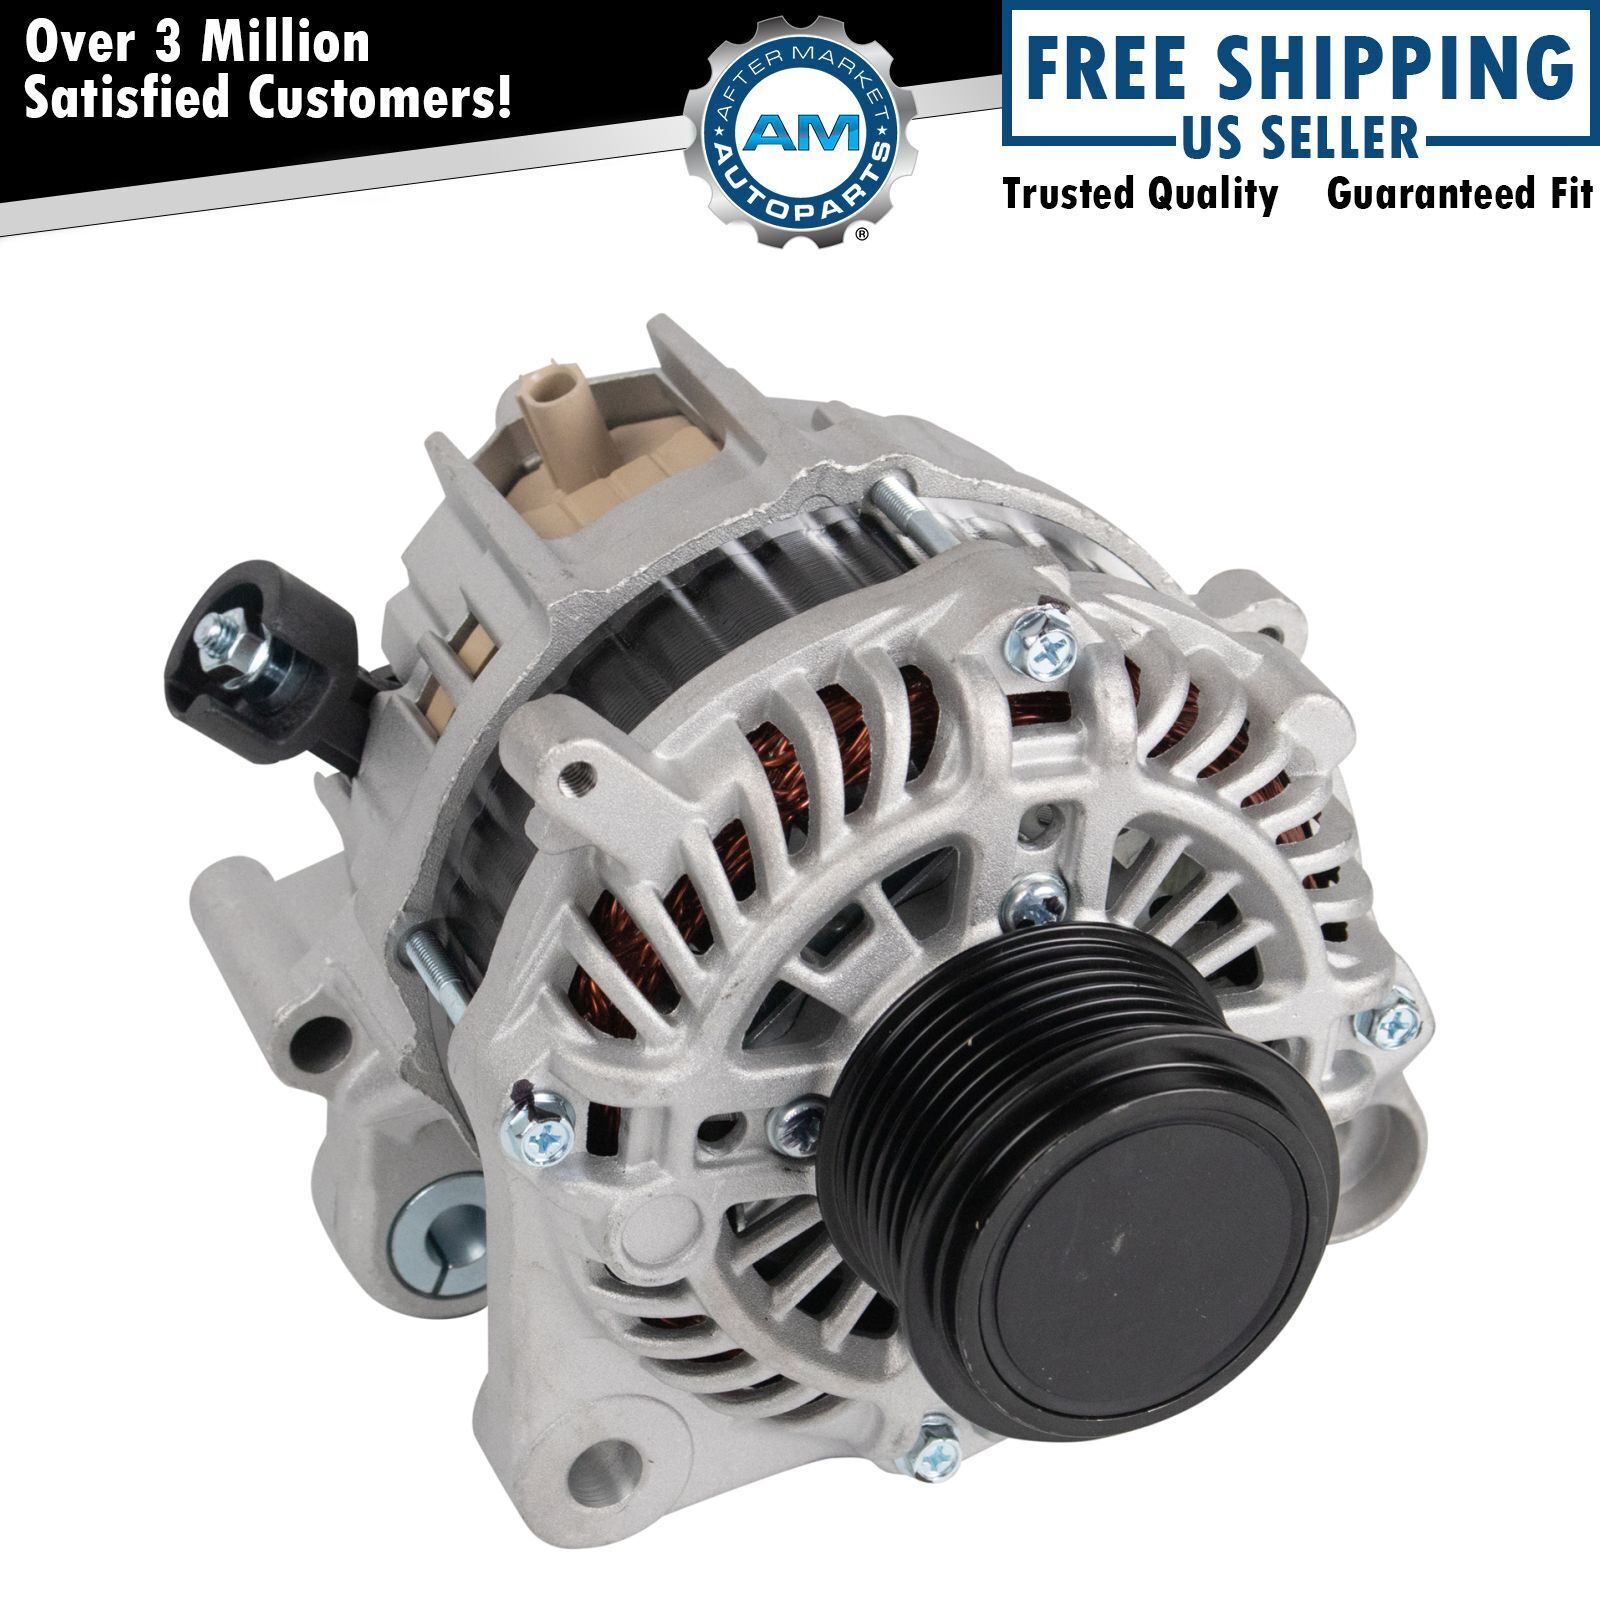 New Replacement Alternator for Honda Accord 2.4L